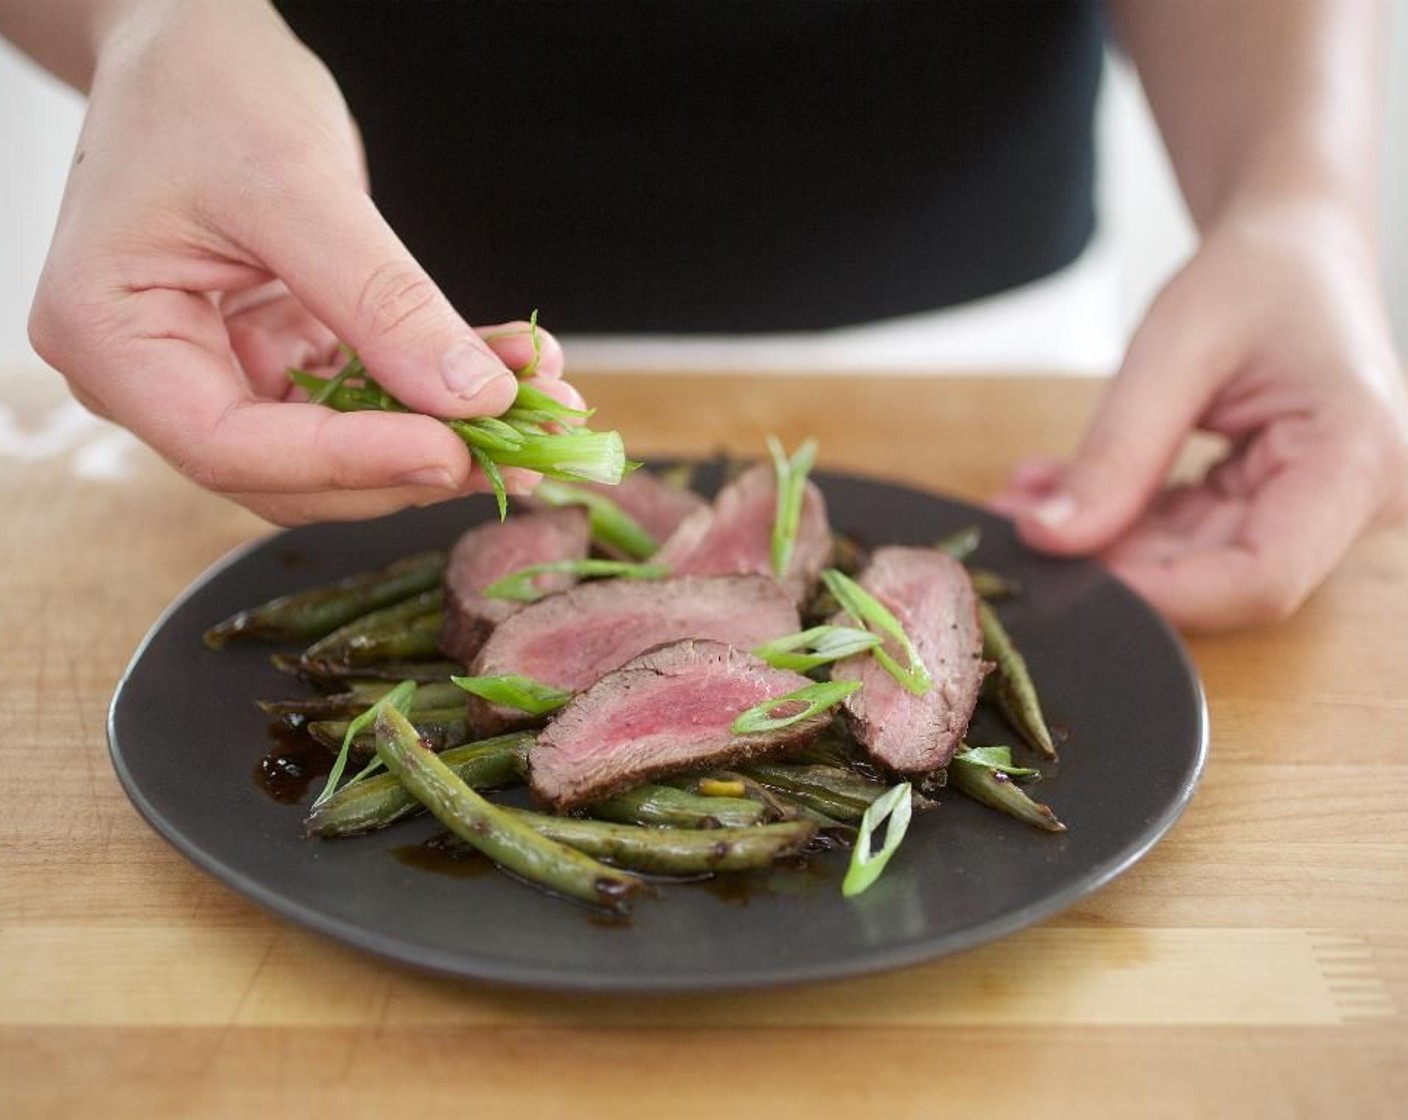 step 14 Divide the green beans evenly between two plates. Arrange the beef tenderloin slices on top of green beans. Garnish with scallions. Awesome, thanks to your fantastic cooking skills and with a little help from your oven, the meal is now ready to be served.